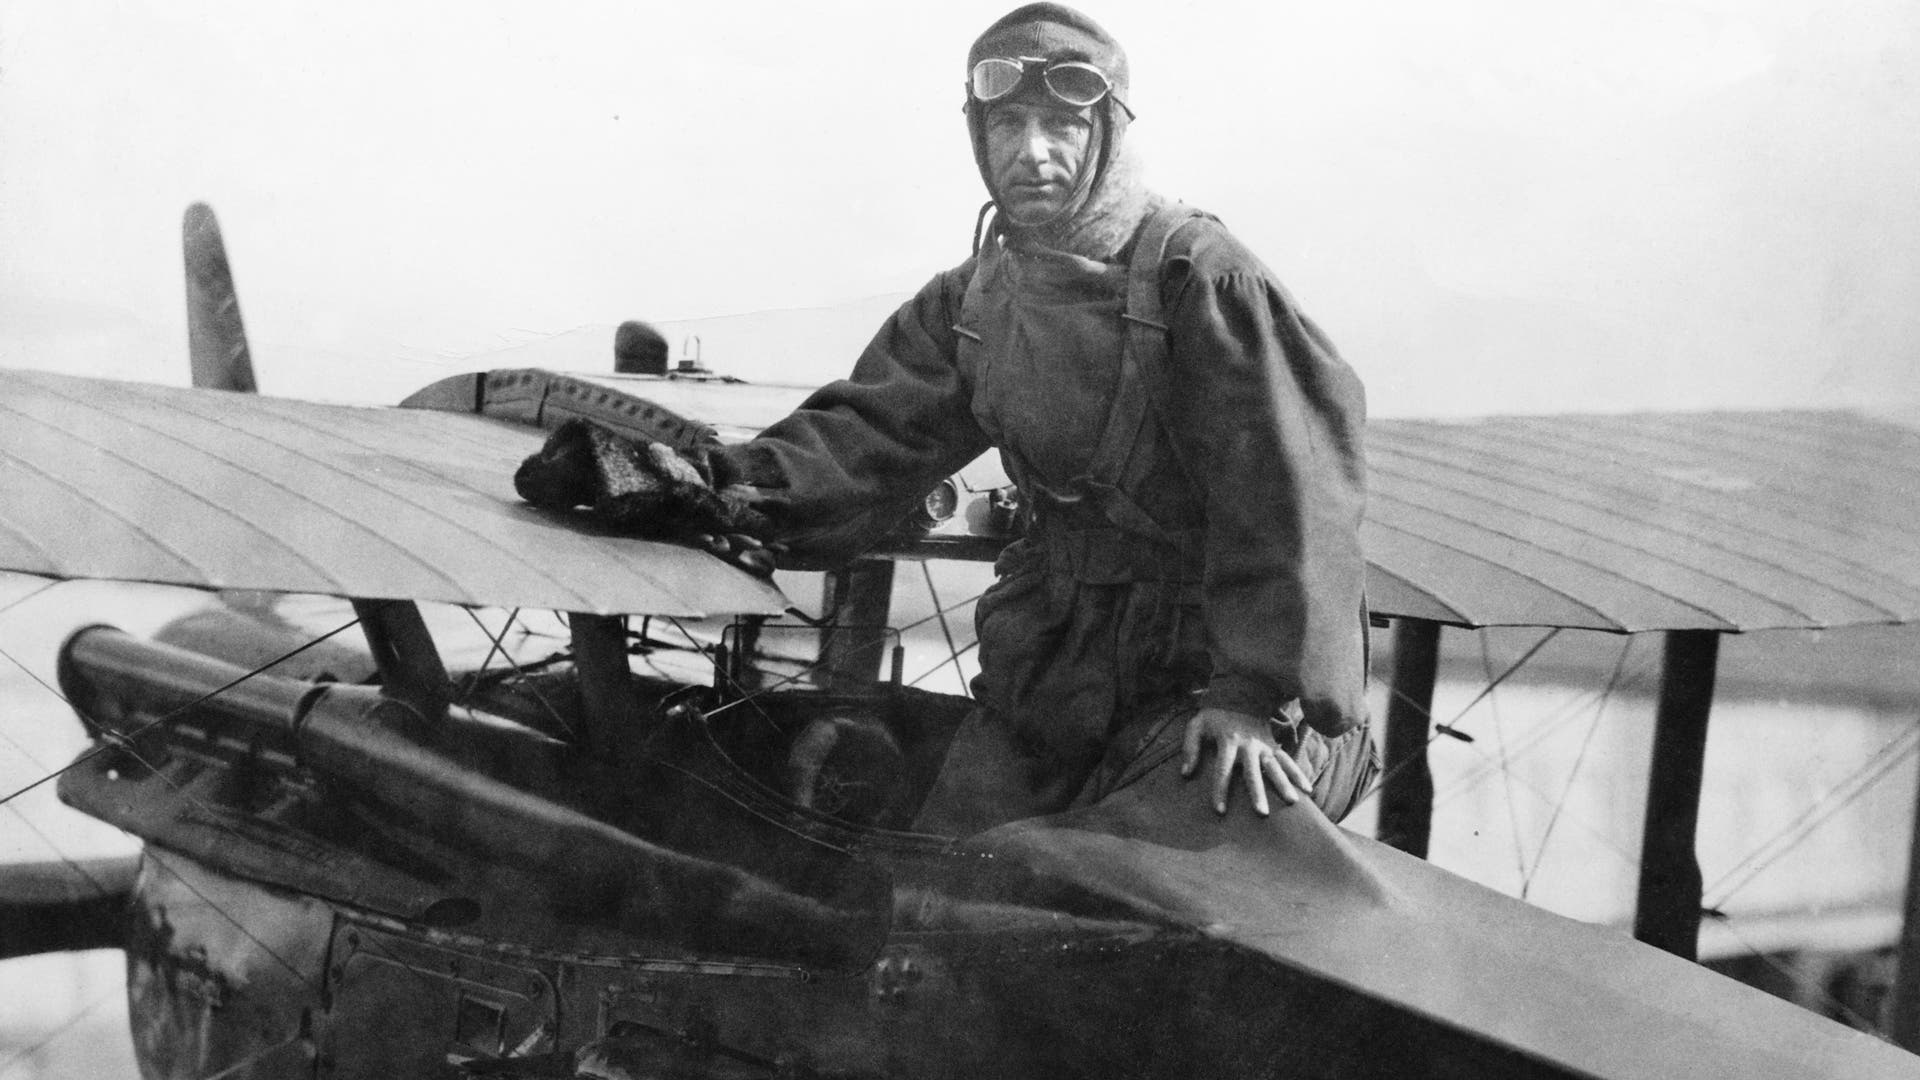 Brigadier General Billy Mitchell in cockpit of a Thomas Morse Pursuit Plane. Ca. 1910s.